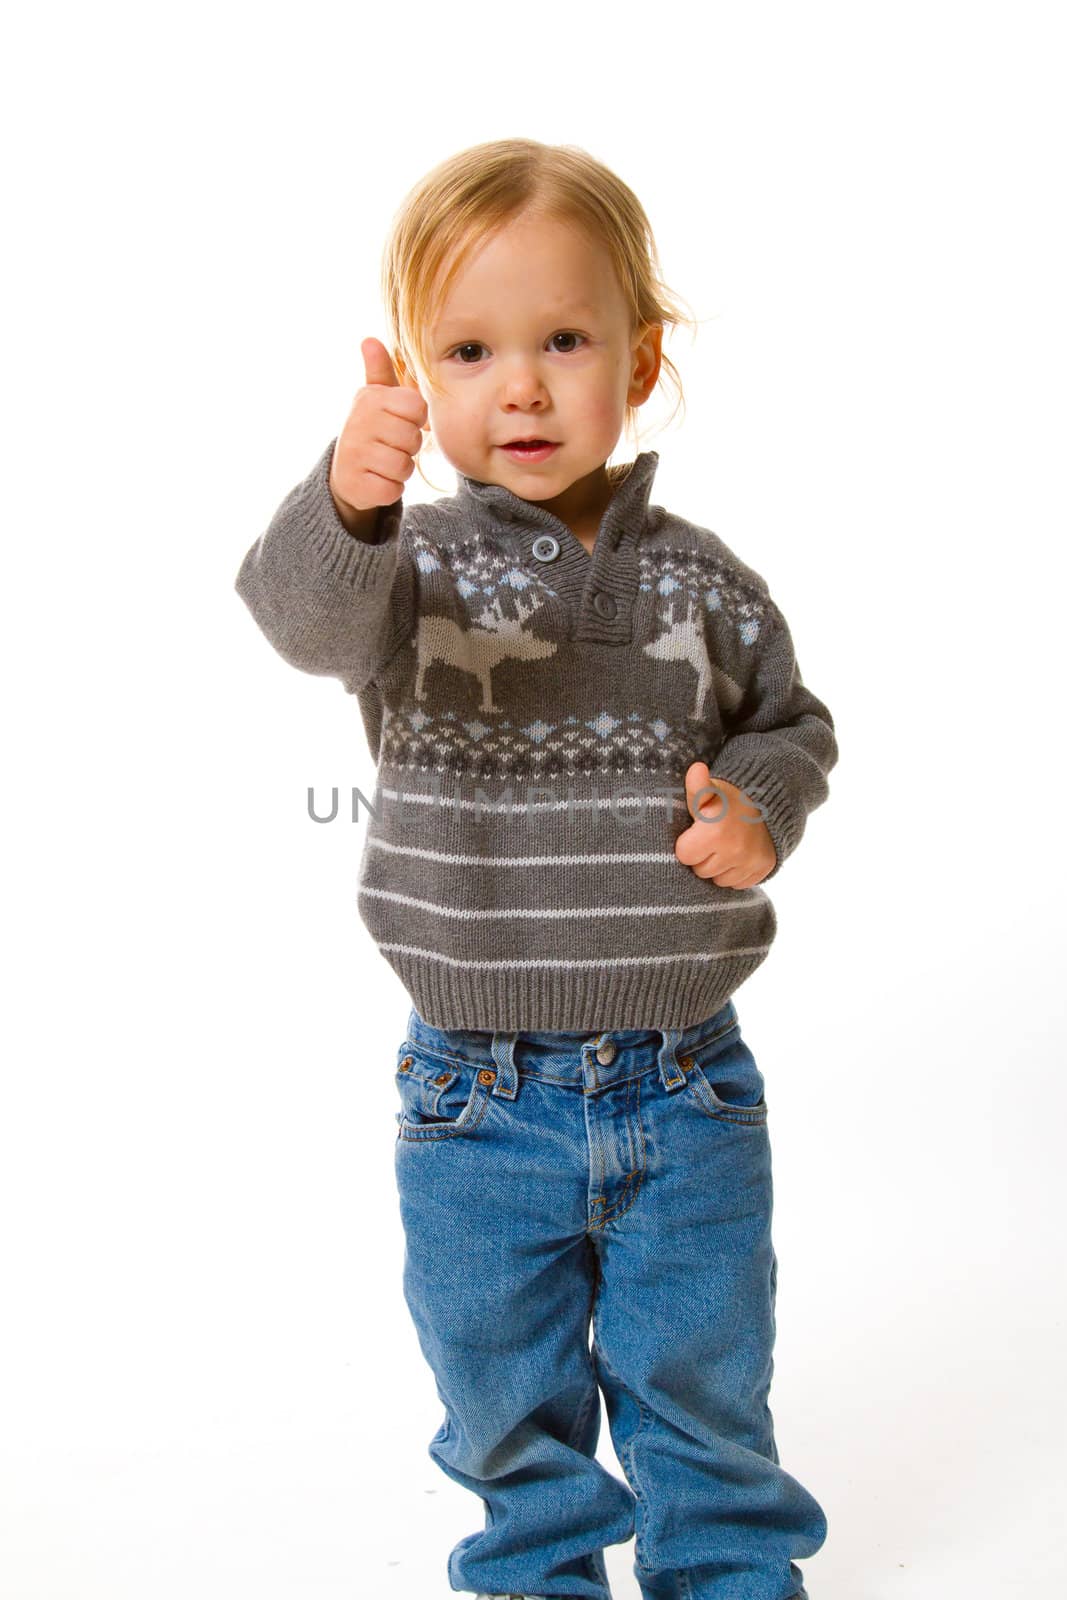 A young boy in a sweater in the studio for a portrait against a white background.